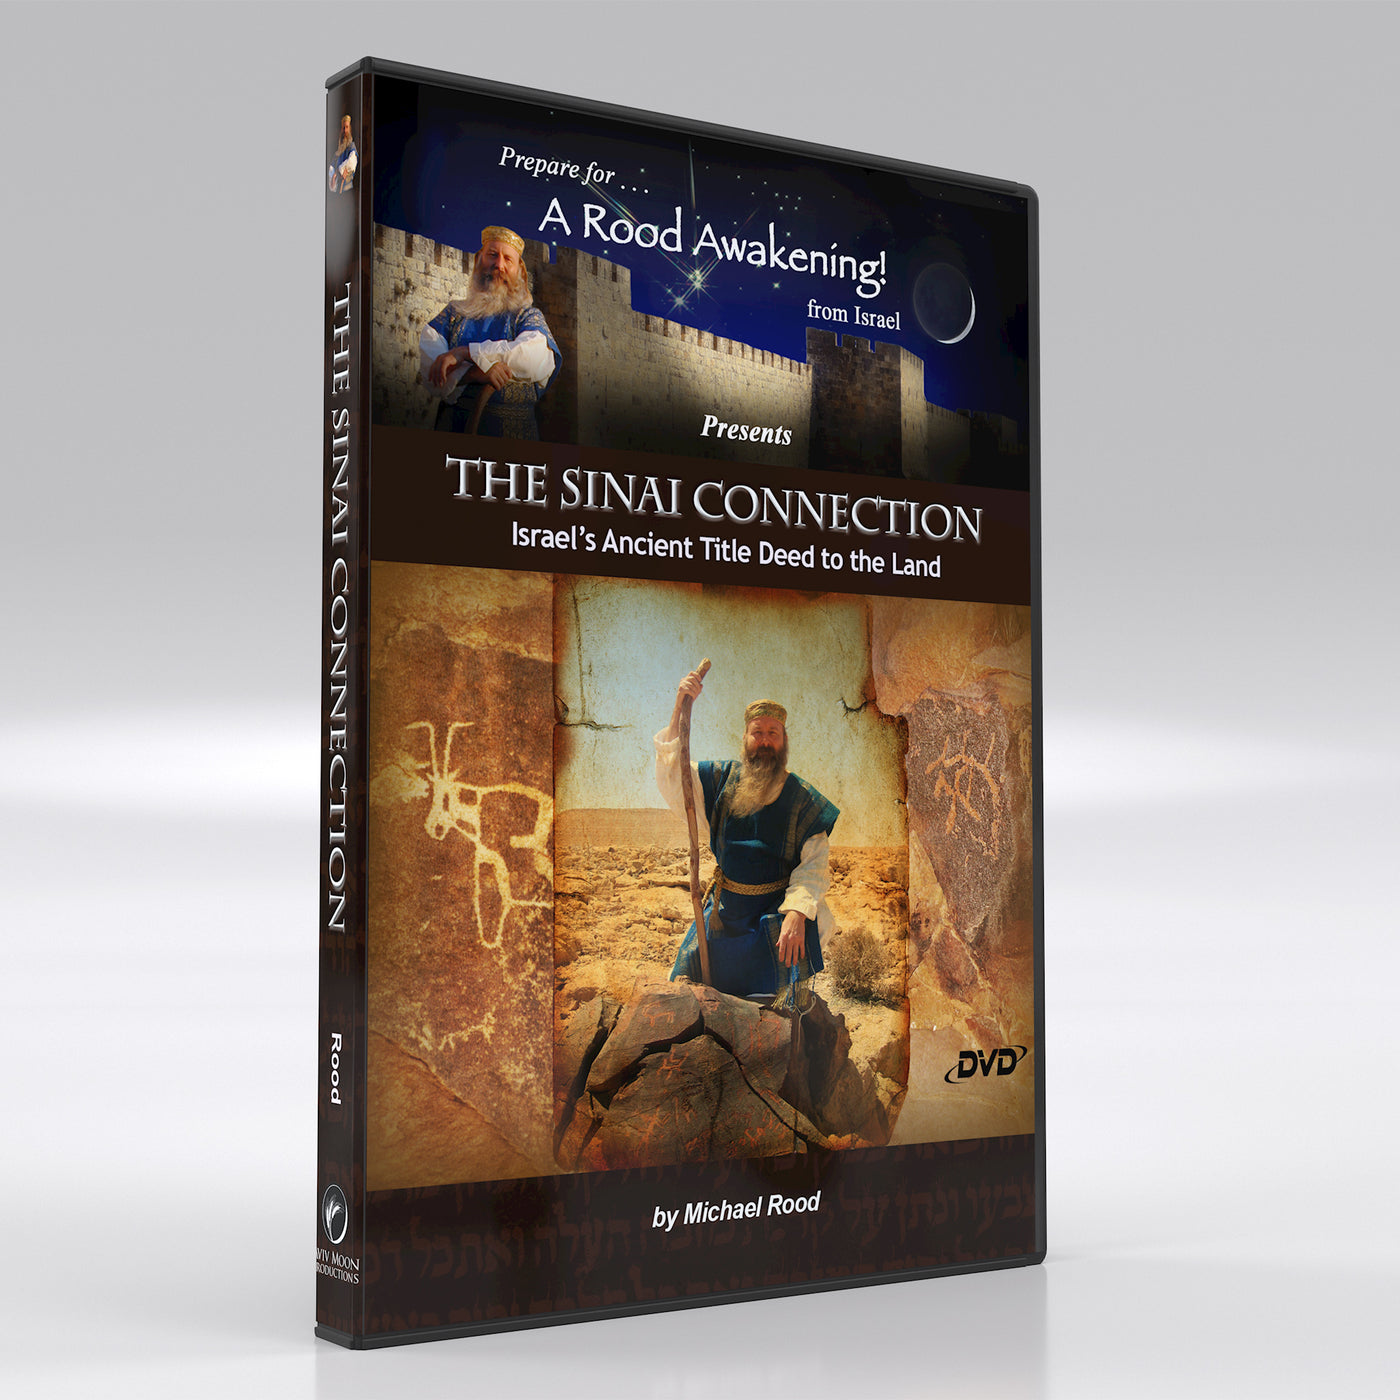 The Sinai Connection